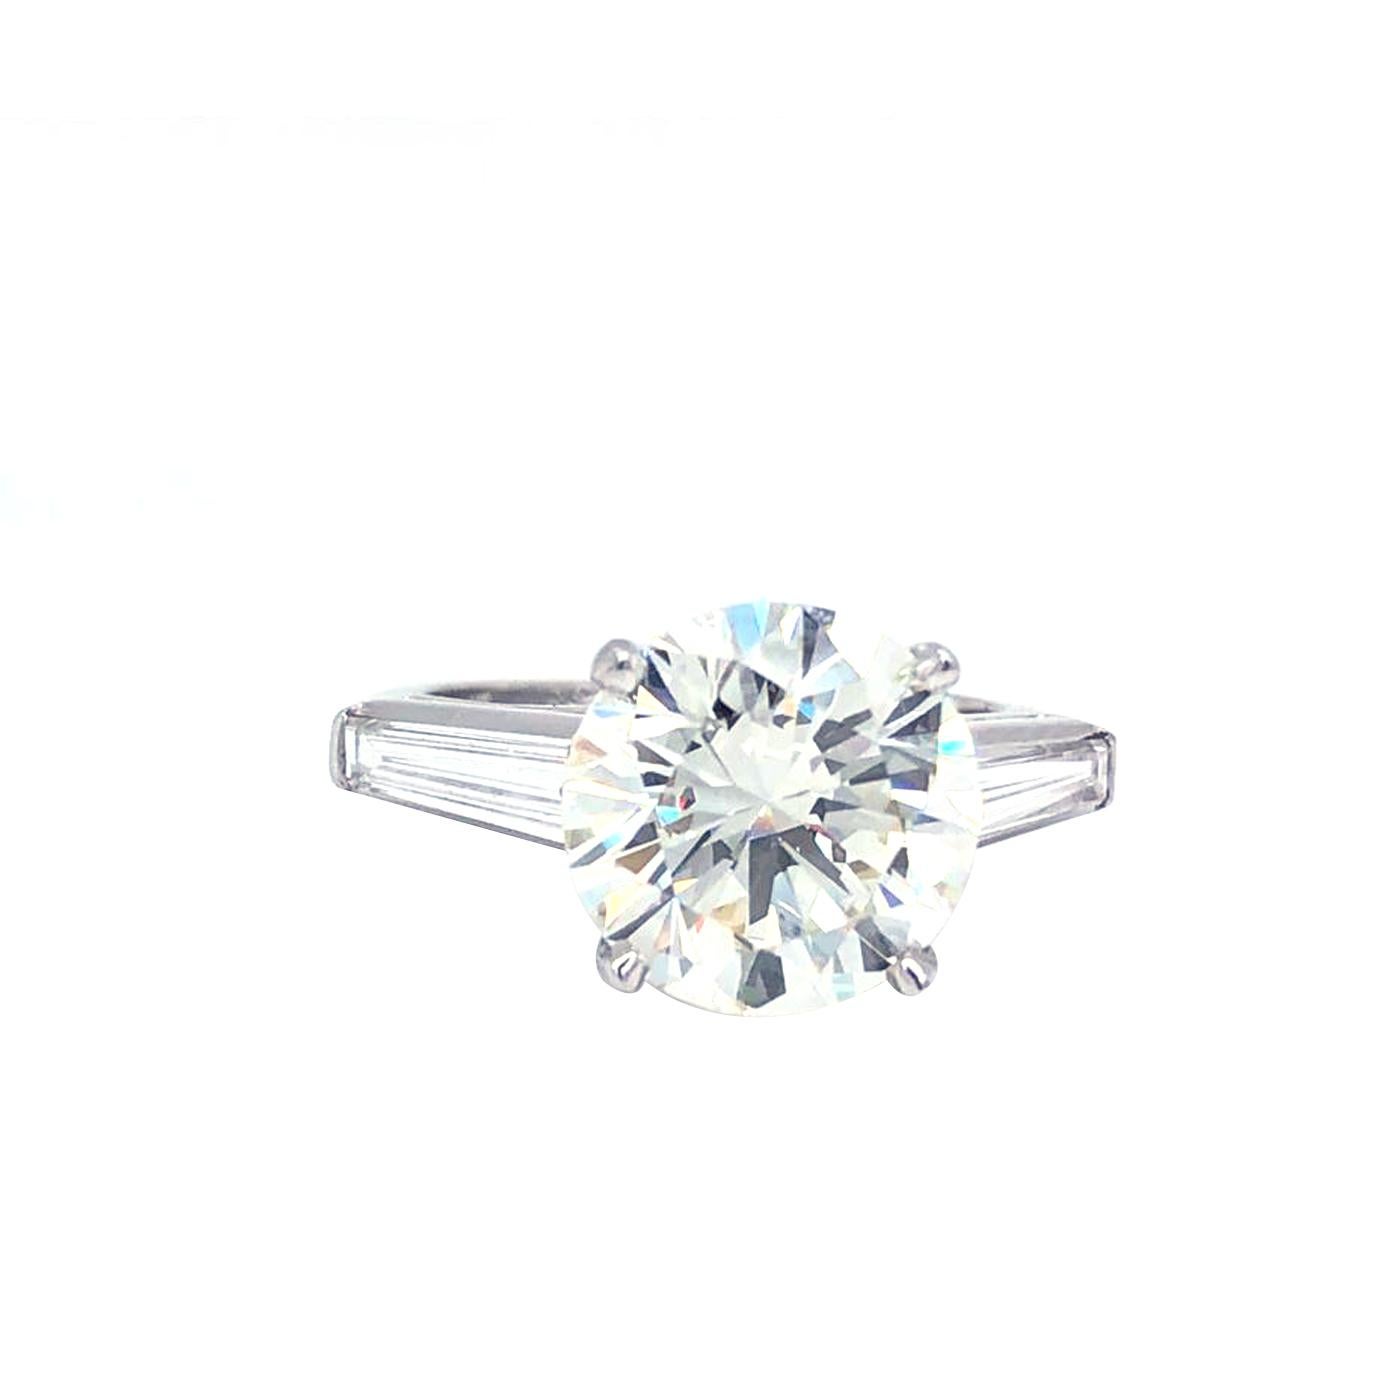 Classic Platinum Diamond ring 4.03 Carat center Round Brilliant Certified by Gia as L - Color , Vs1 Clarity, Excellent - Cut , Excellent - Polish , Excellent - Symmetry and accented by two tapered baguette cut diamonds , Totaling 0.72 carat H color